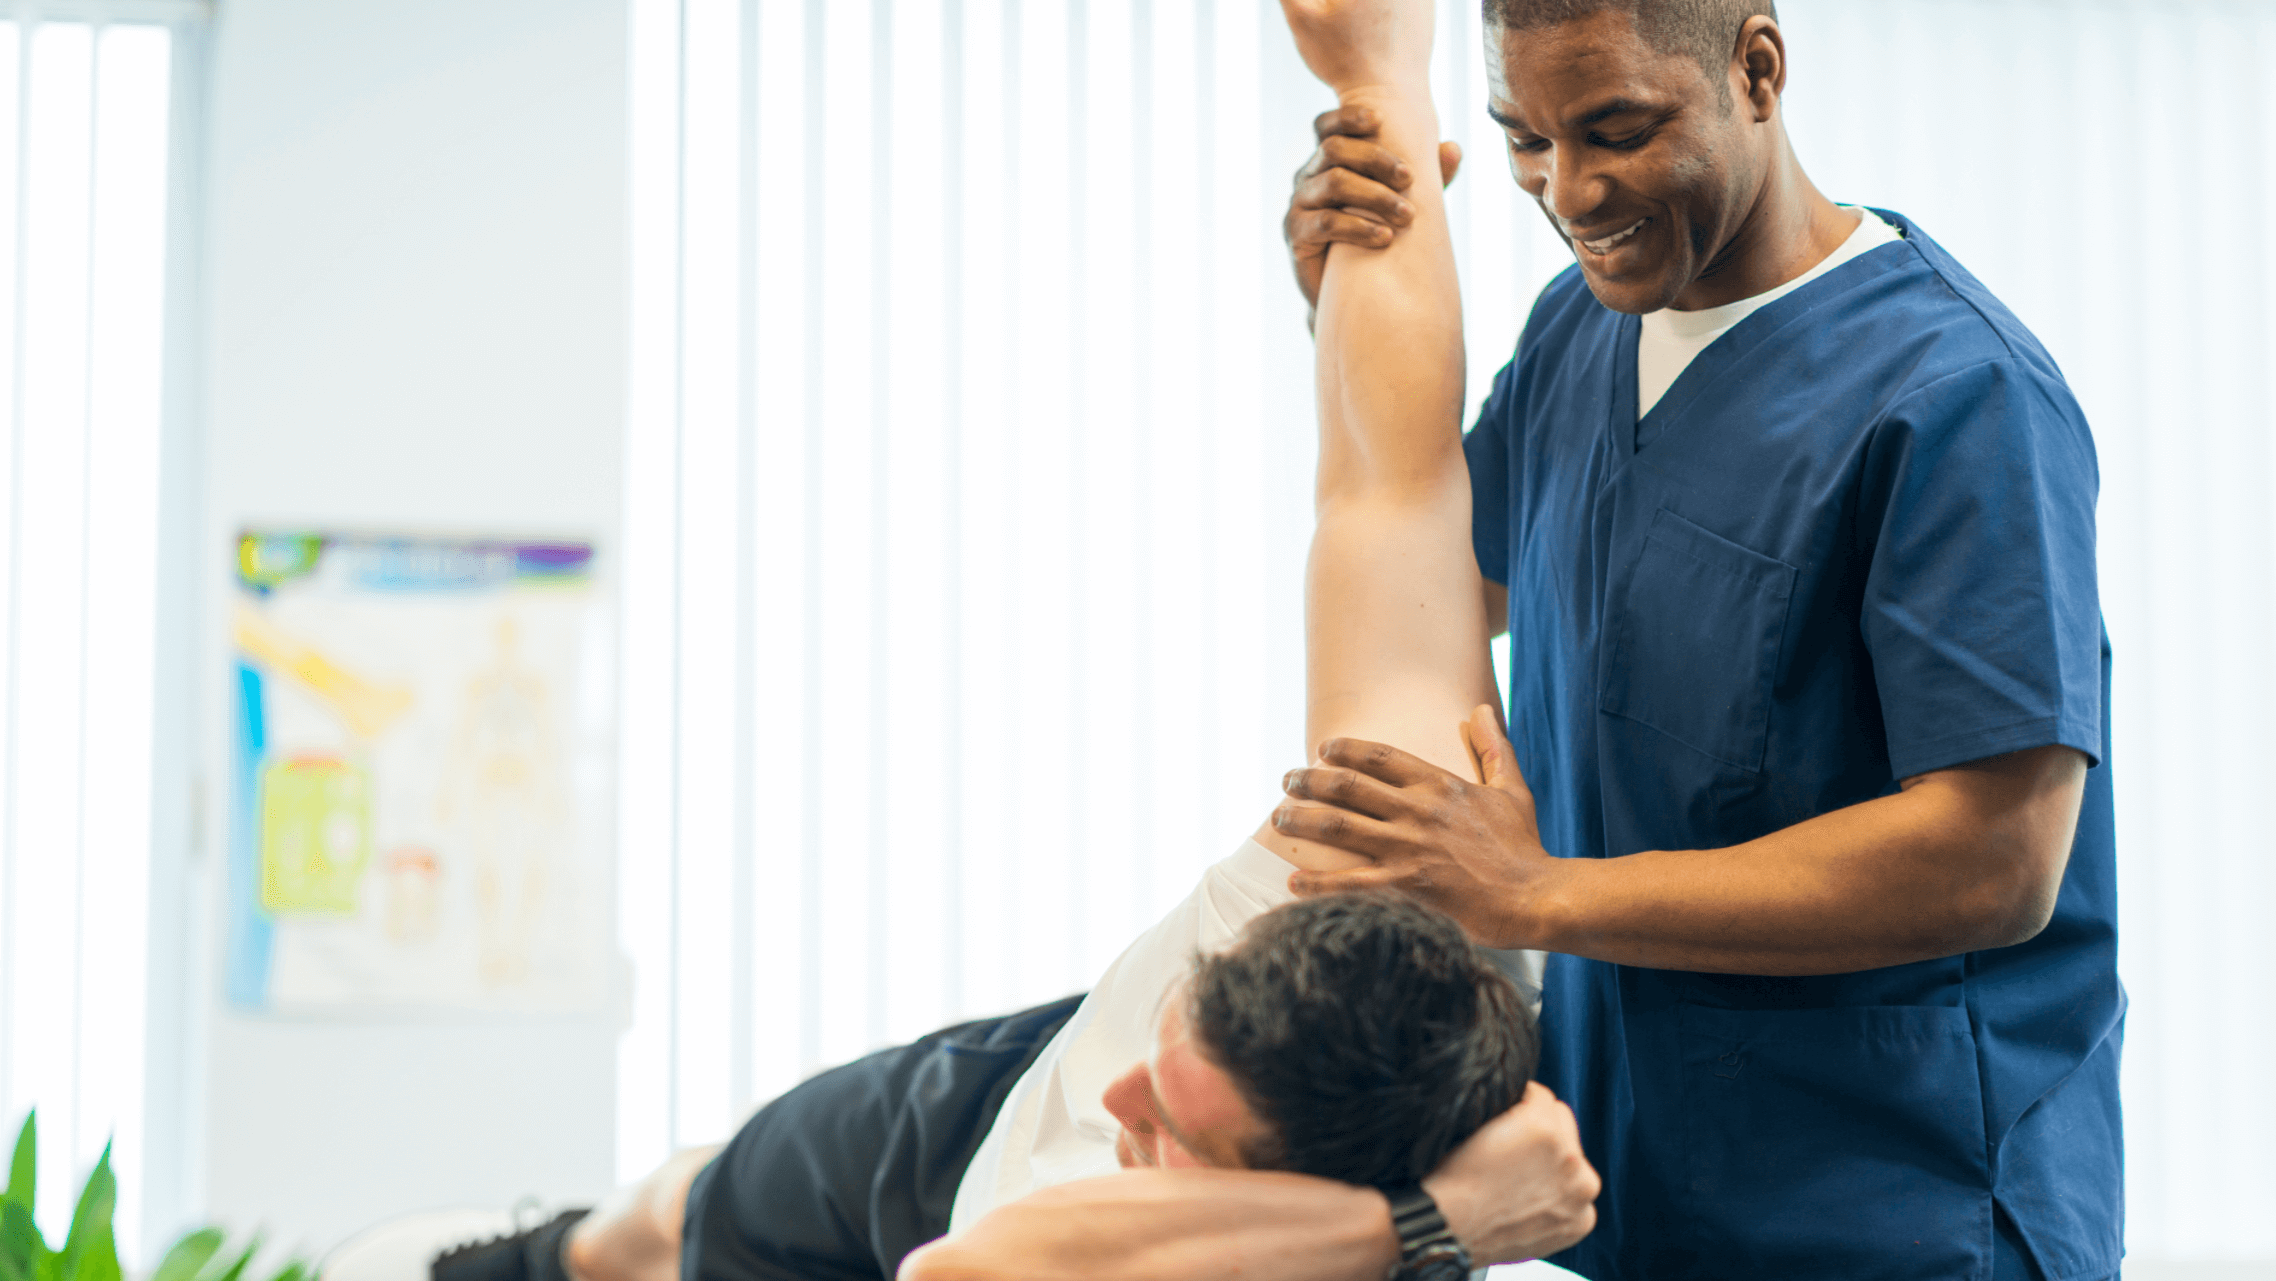 Recovering from Injury: How Physical Therapy Can Speed Up the Healing Process